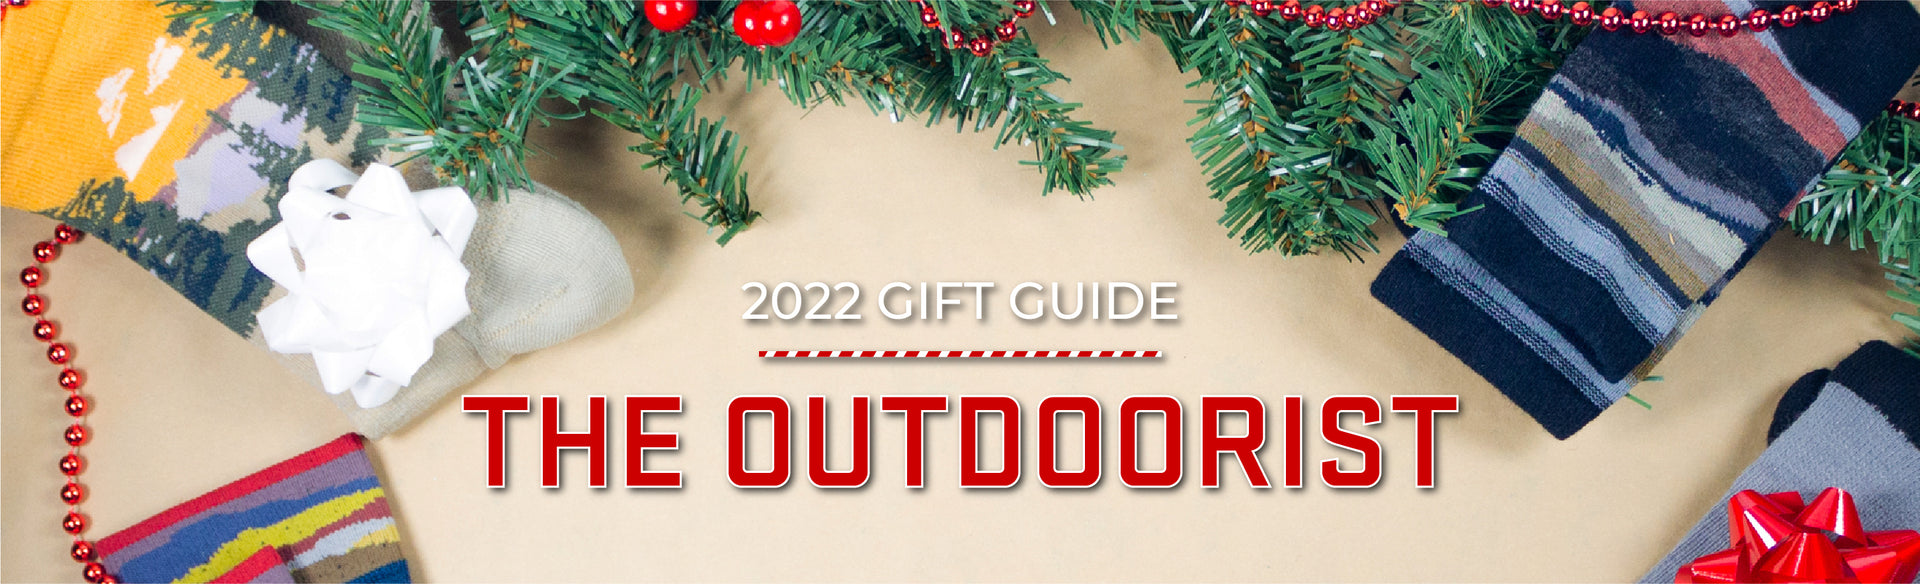 Gift Guide 2022 - Outdoorists  Header Image Text Overlay